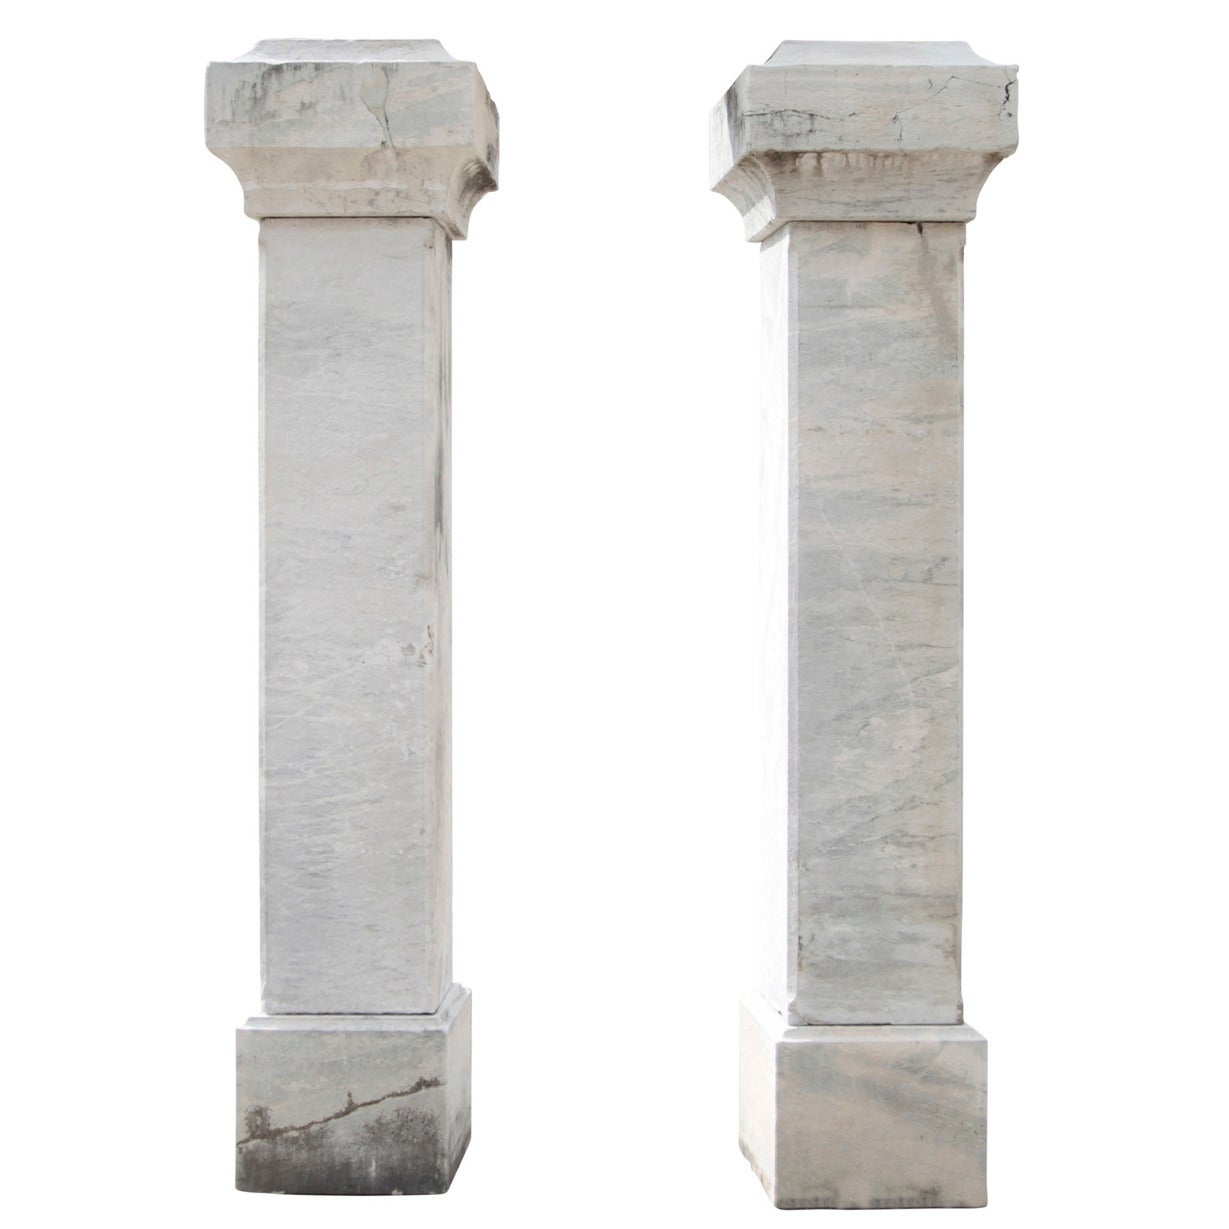 Pair of Italian Pillars from the 19th or 20th Century